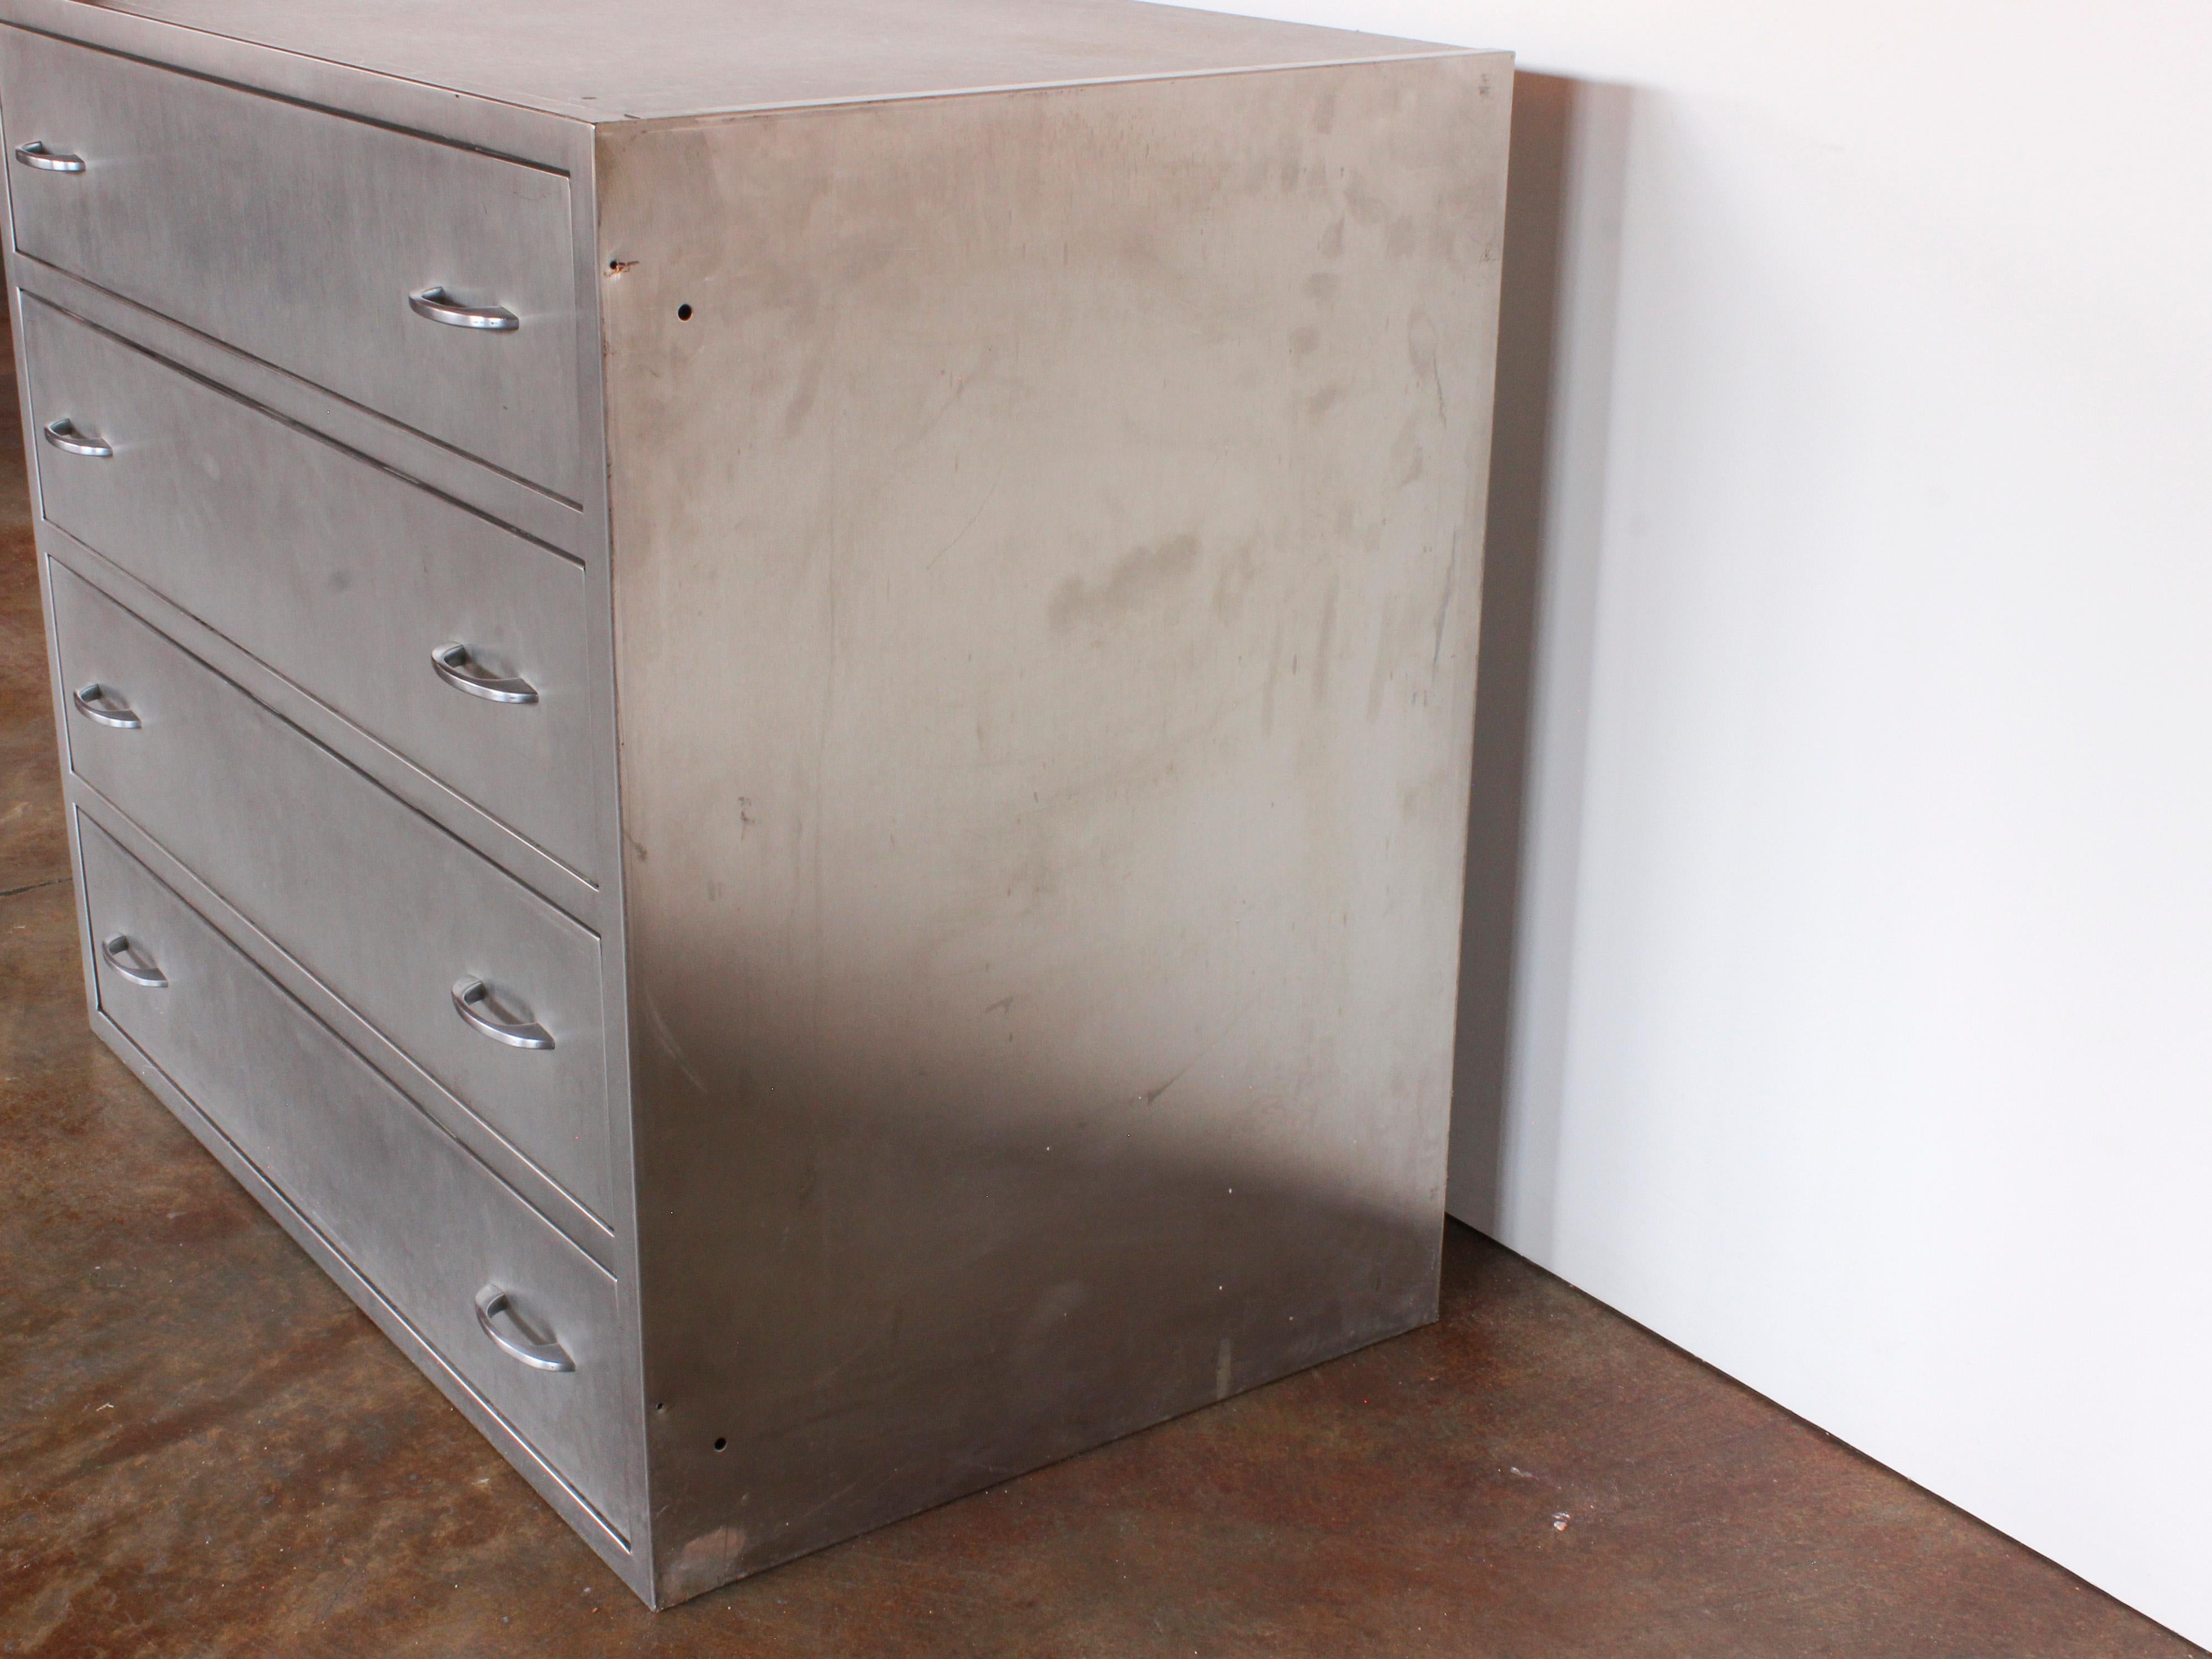 Mid-20th Century American Industrial Stainless Steel Chest With 4 Drawers, C. 1940s For Sale